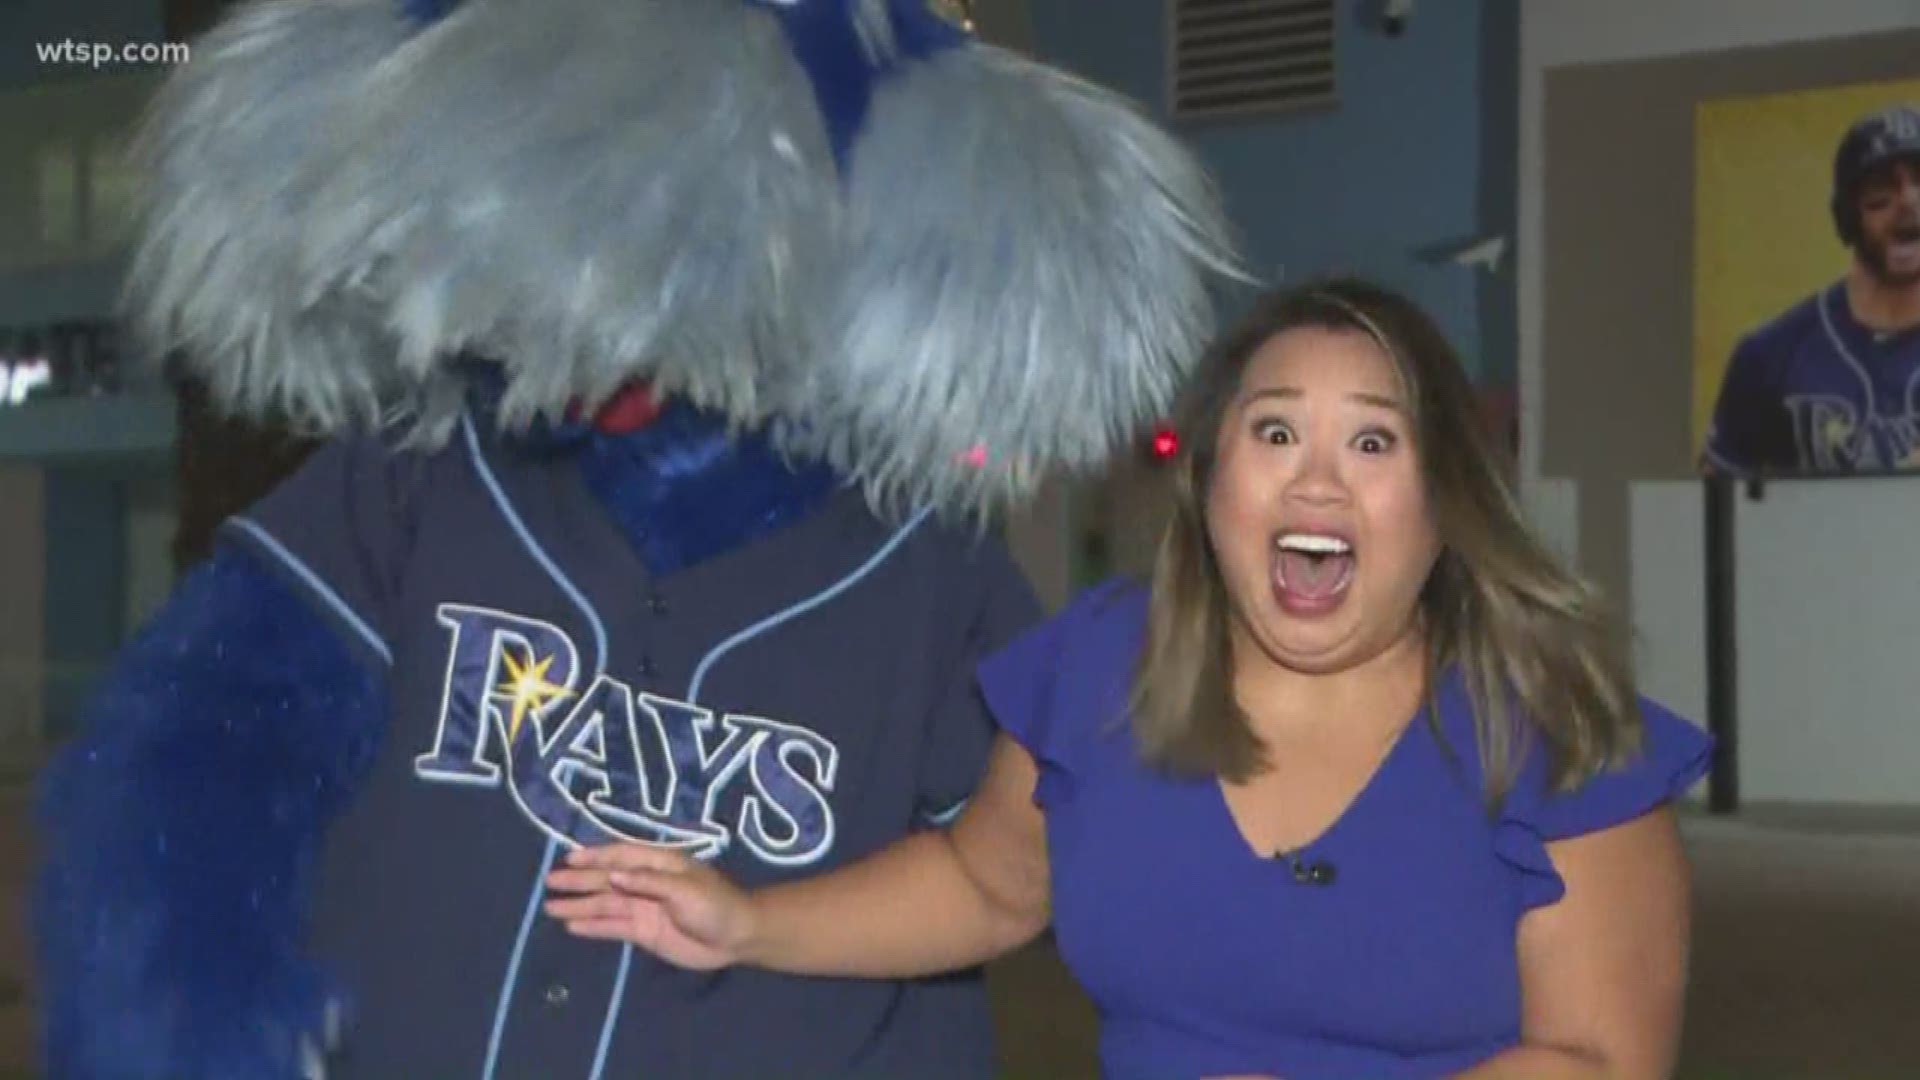 Raymond of the Rays welcomes 10News' Thuy Lan with a kiss